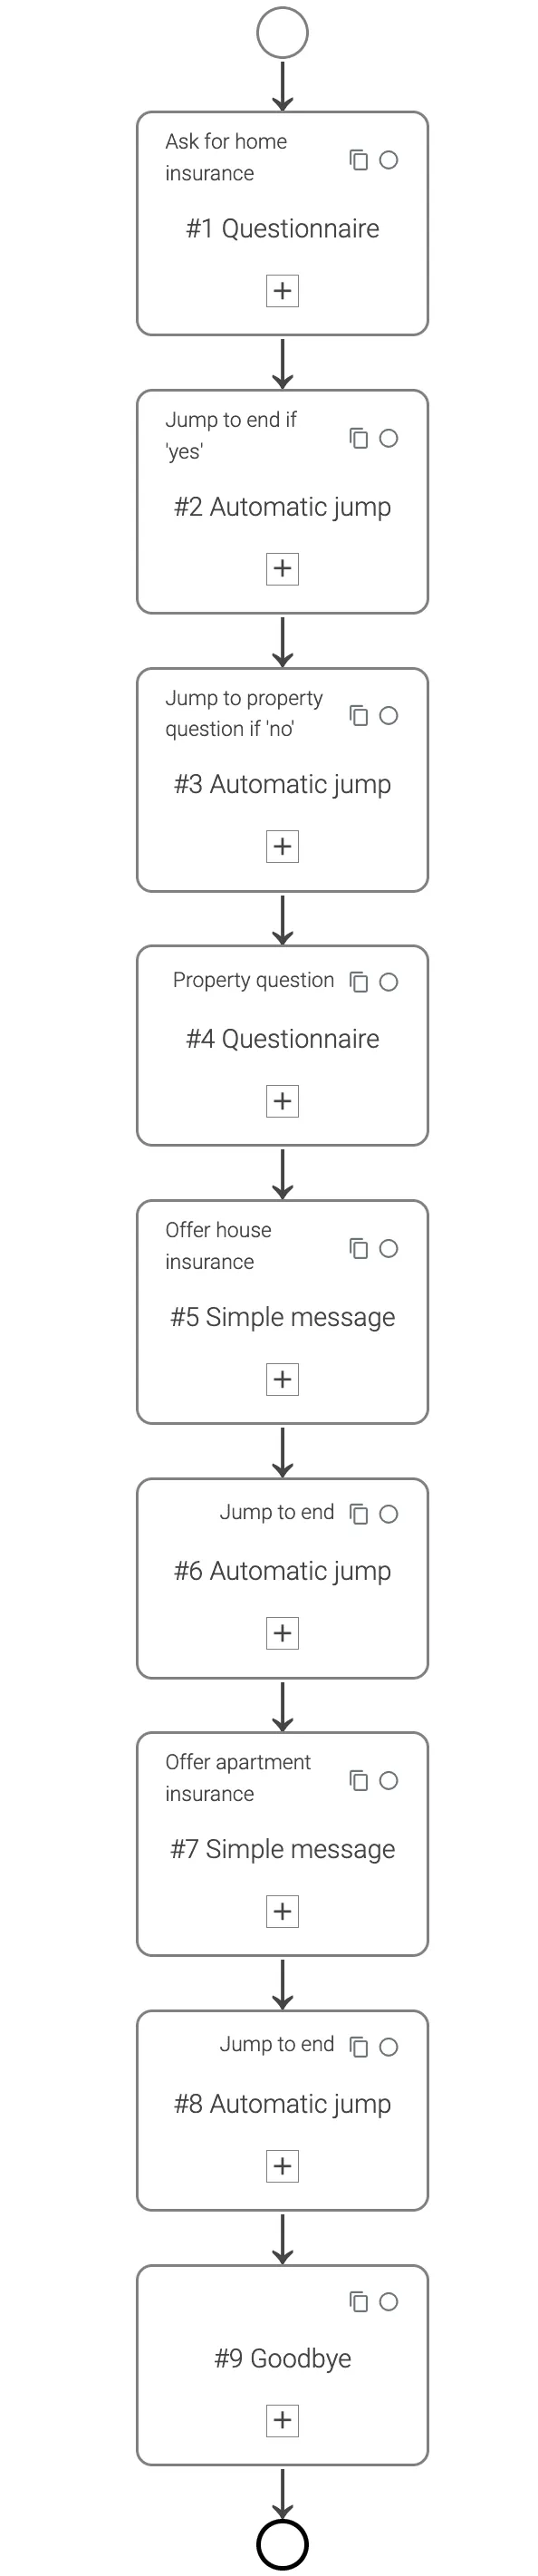 An Insurance Example in the Old Process Editor.